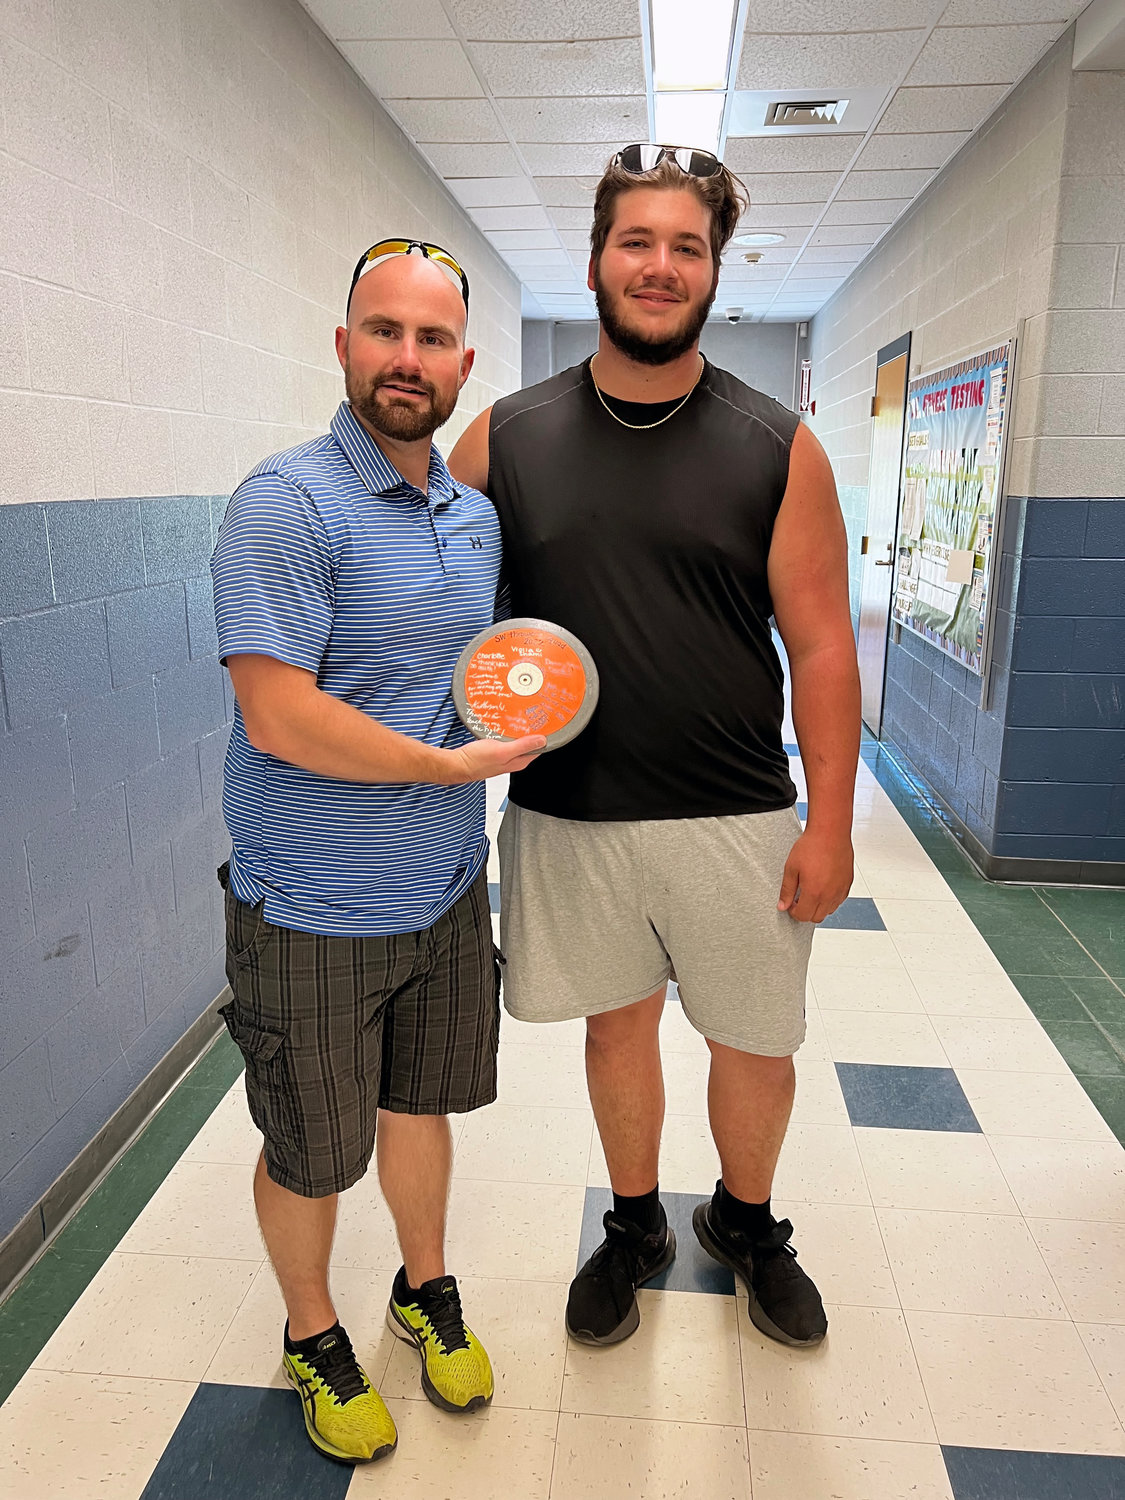 Chris Campanelli presents Coach Steve Rogers with a signed discus as a token of his and the team’s appreciation. Rogers, a former Section 9 champion thrower, was instrumental in Campanelli’s arc of progress. Prior to his emergence as the Sullivan West boys track coach, Campanelli was by and large self-taught.